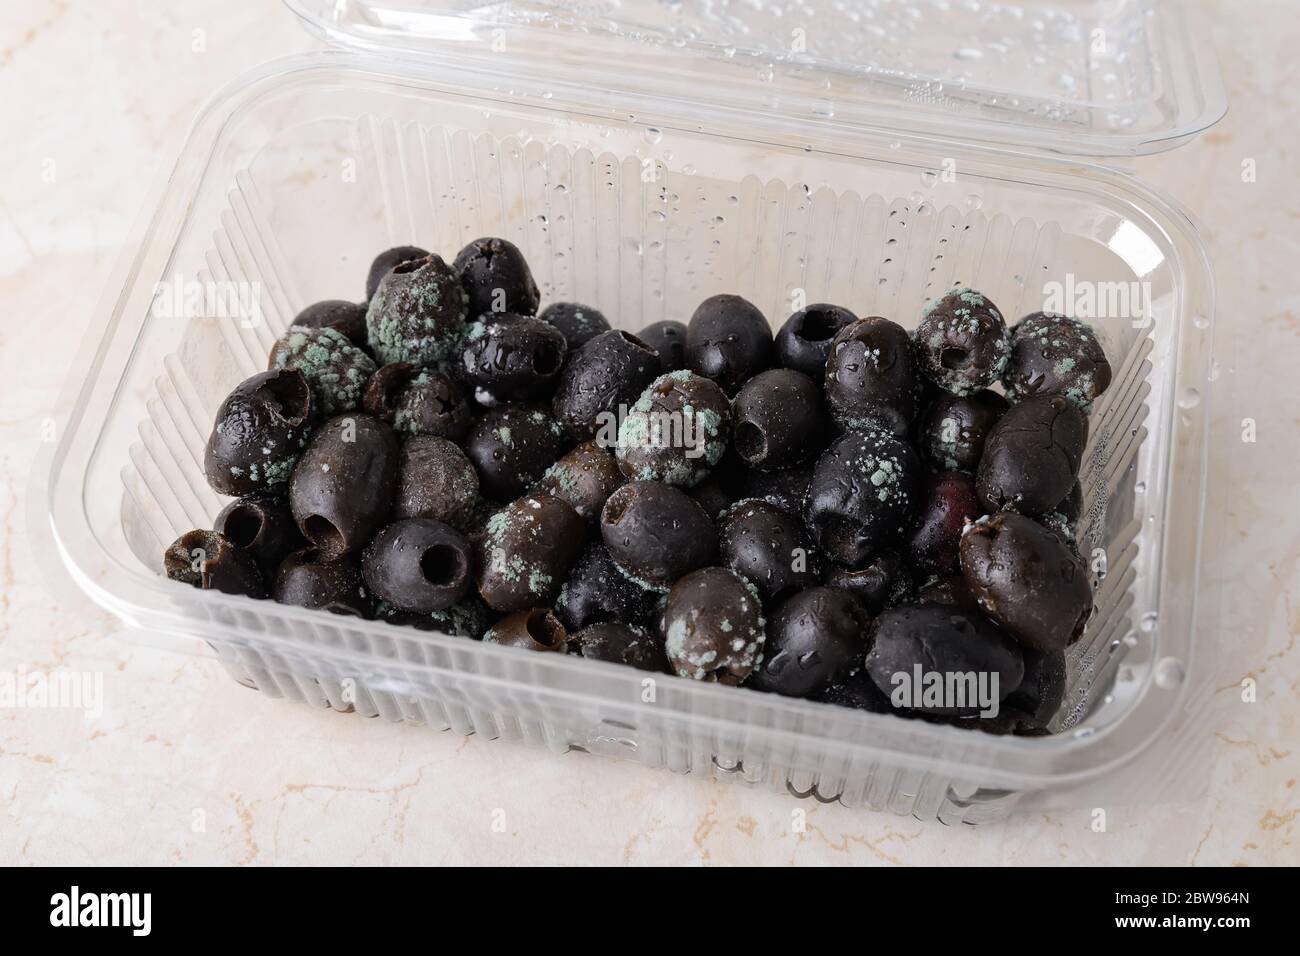 Spoiled olives with white green mold in a plastic food container on a kitchen table. Mold fungus on stale olives. Food forgotten in the fridge. Stock Photo